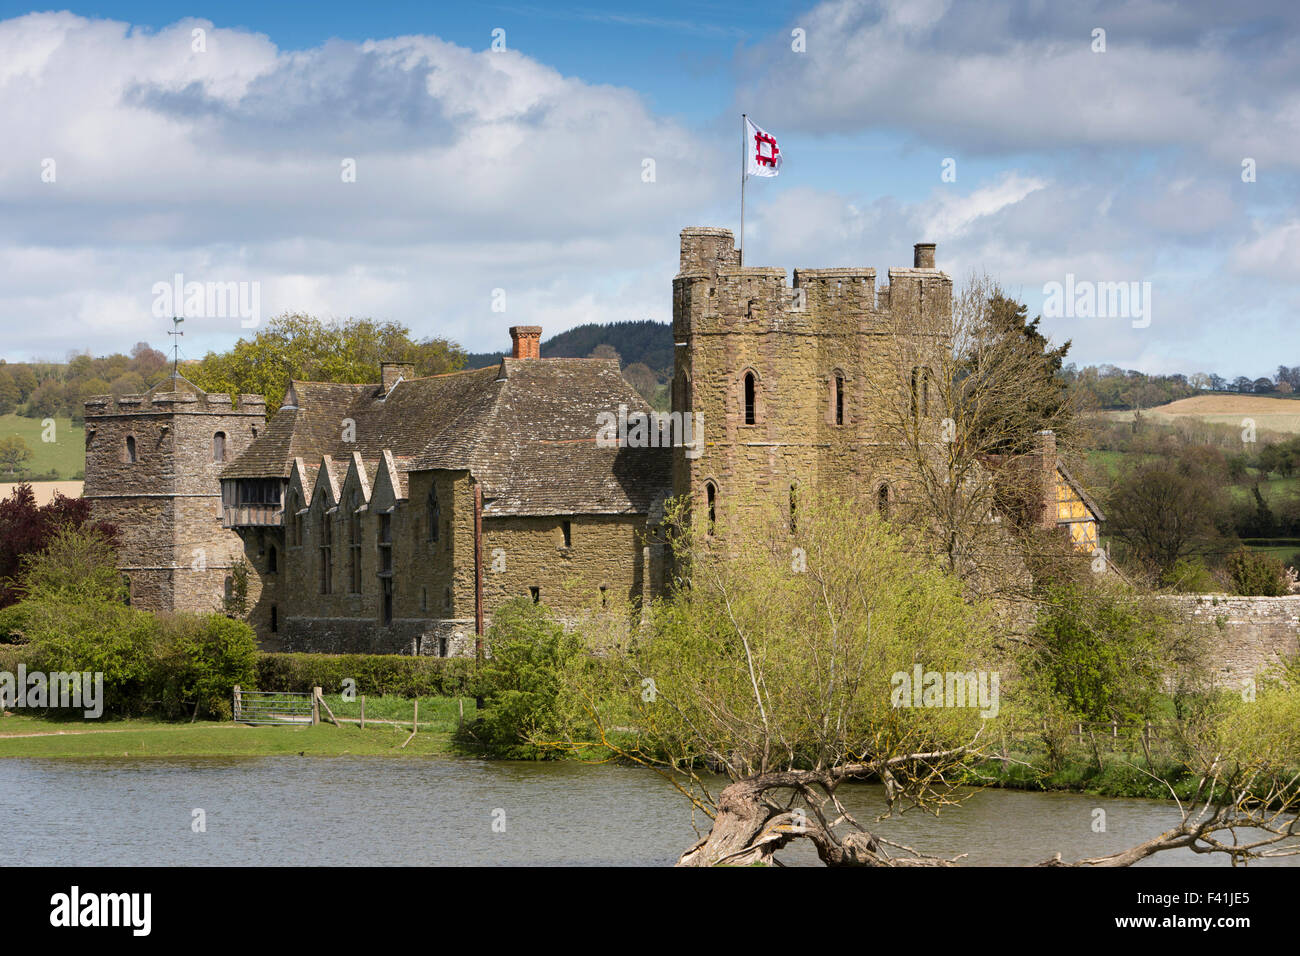 UK, England, Shropshire, Craven Arms, Stokesay Castle from across the lake Stock Photo